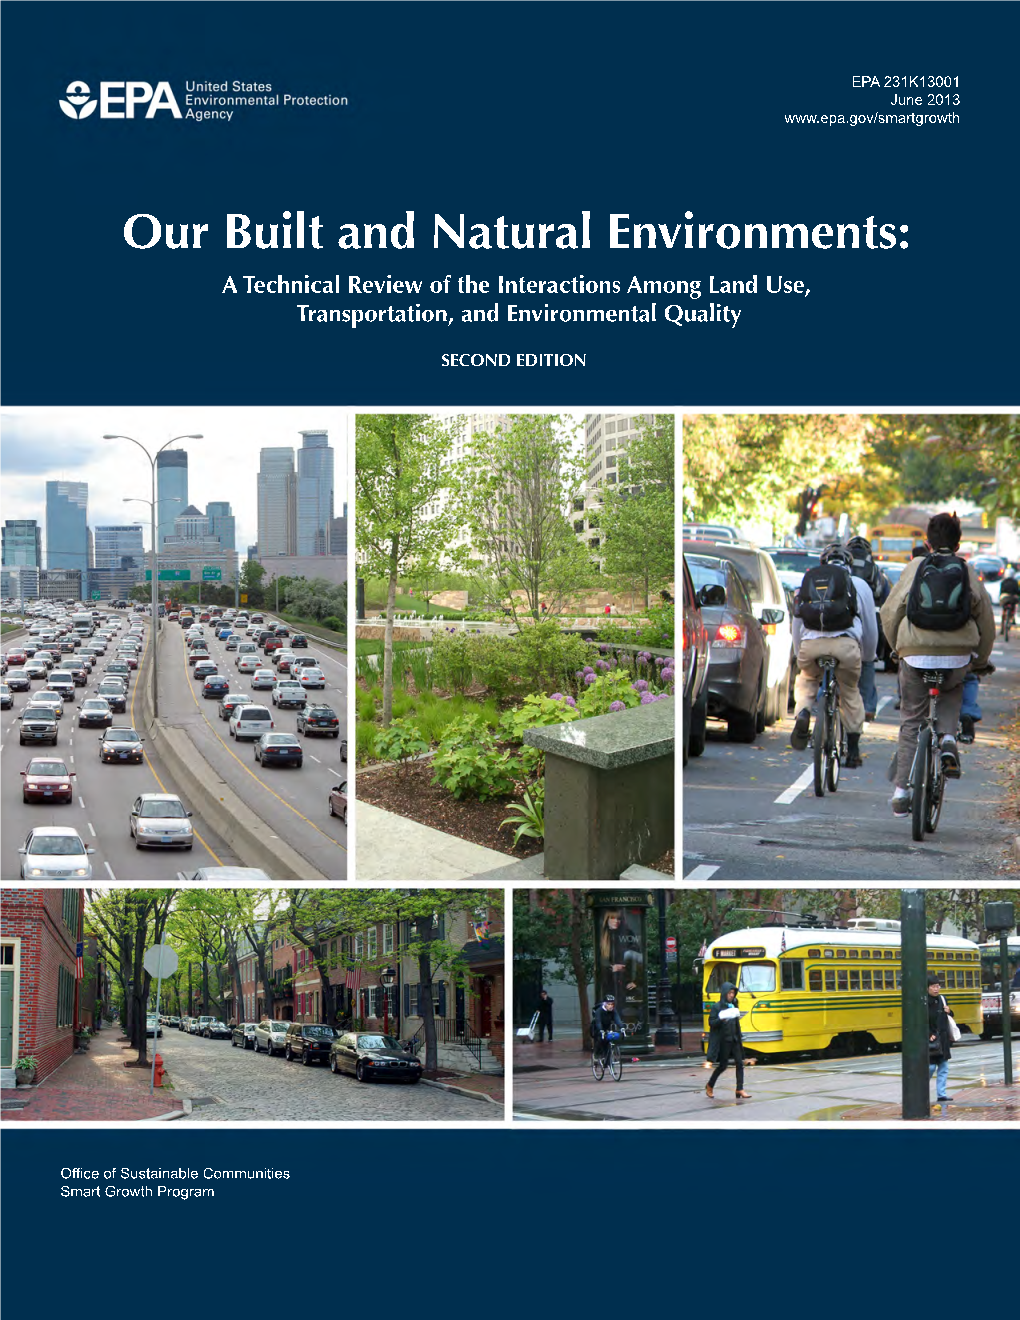 Our Built and Natural Environments: a Technical Review of the Interactions Among Land Use, Transportation, and Environmental Quality